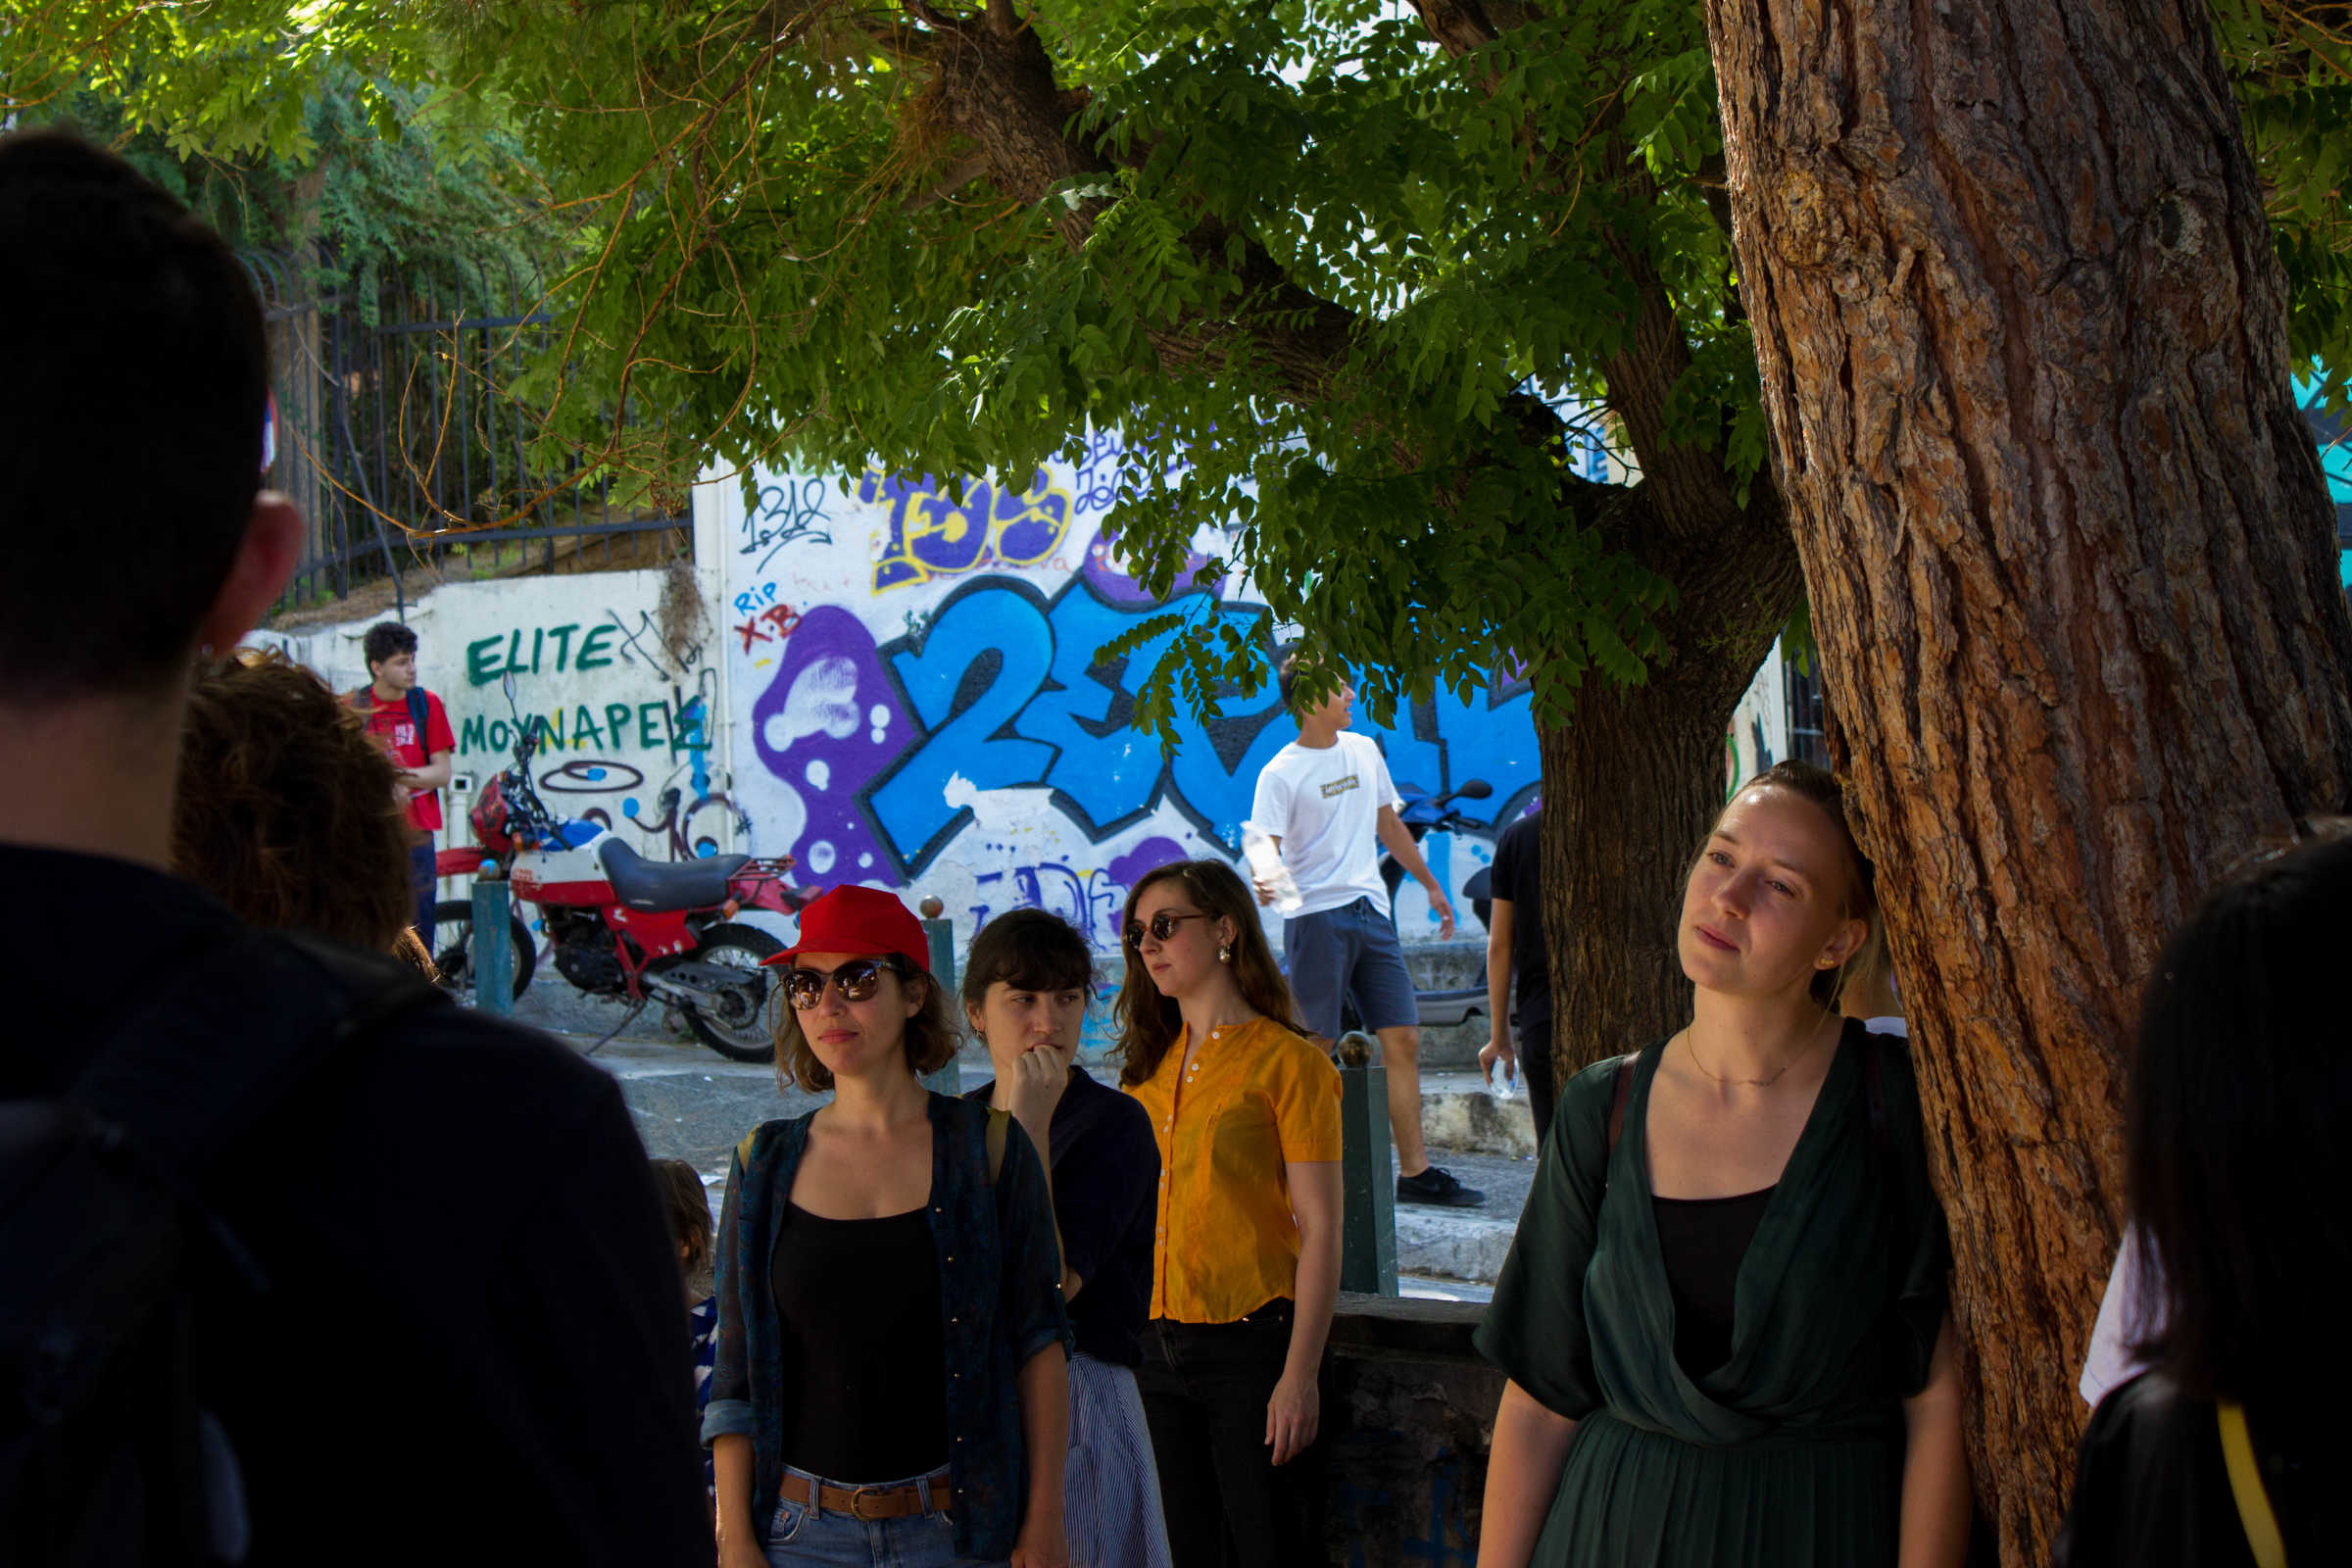 COOP SUMMIT 2018: Final presentation of the Curating Positions study group, COOP Summit 2018: A curated walk up and down hilly Neapoli (Athens), filled with different performances in communal gardens, residential houses and narrow pathways. June 2018, Athens. Photo by Silvia Ulloa.